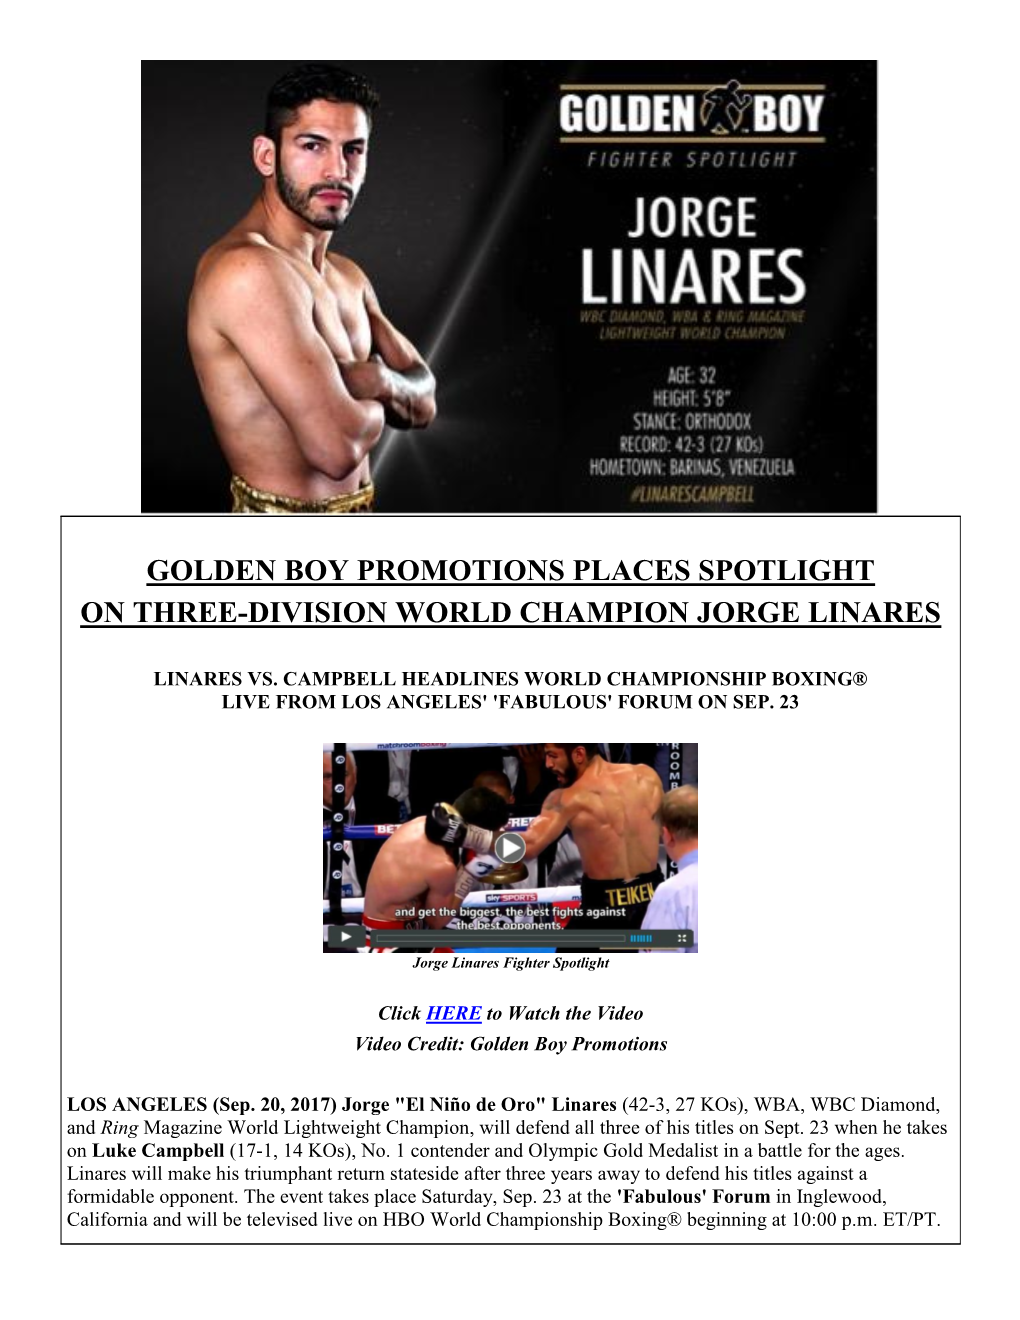 Golden Boy Promotions Places Spotlight on Three-Division World Champion Jorge Linares